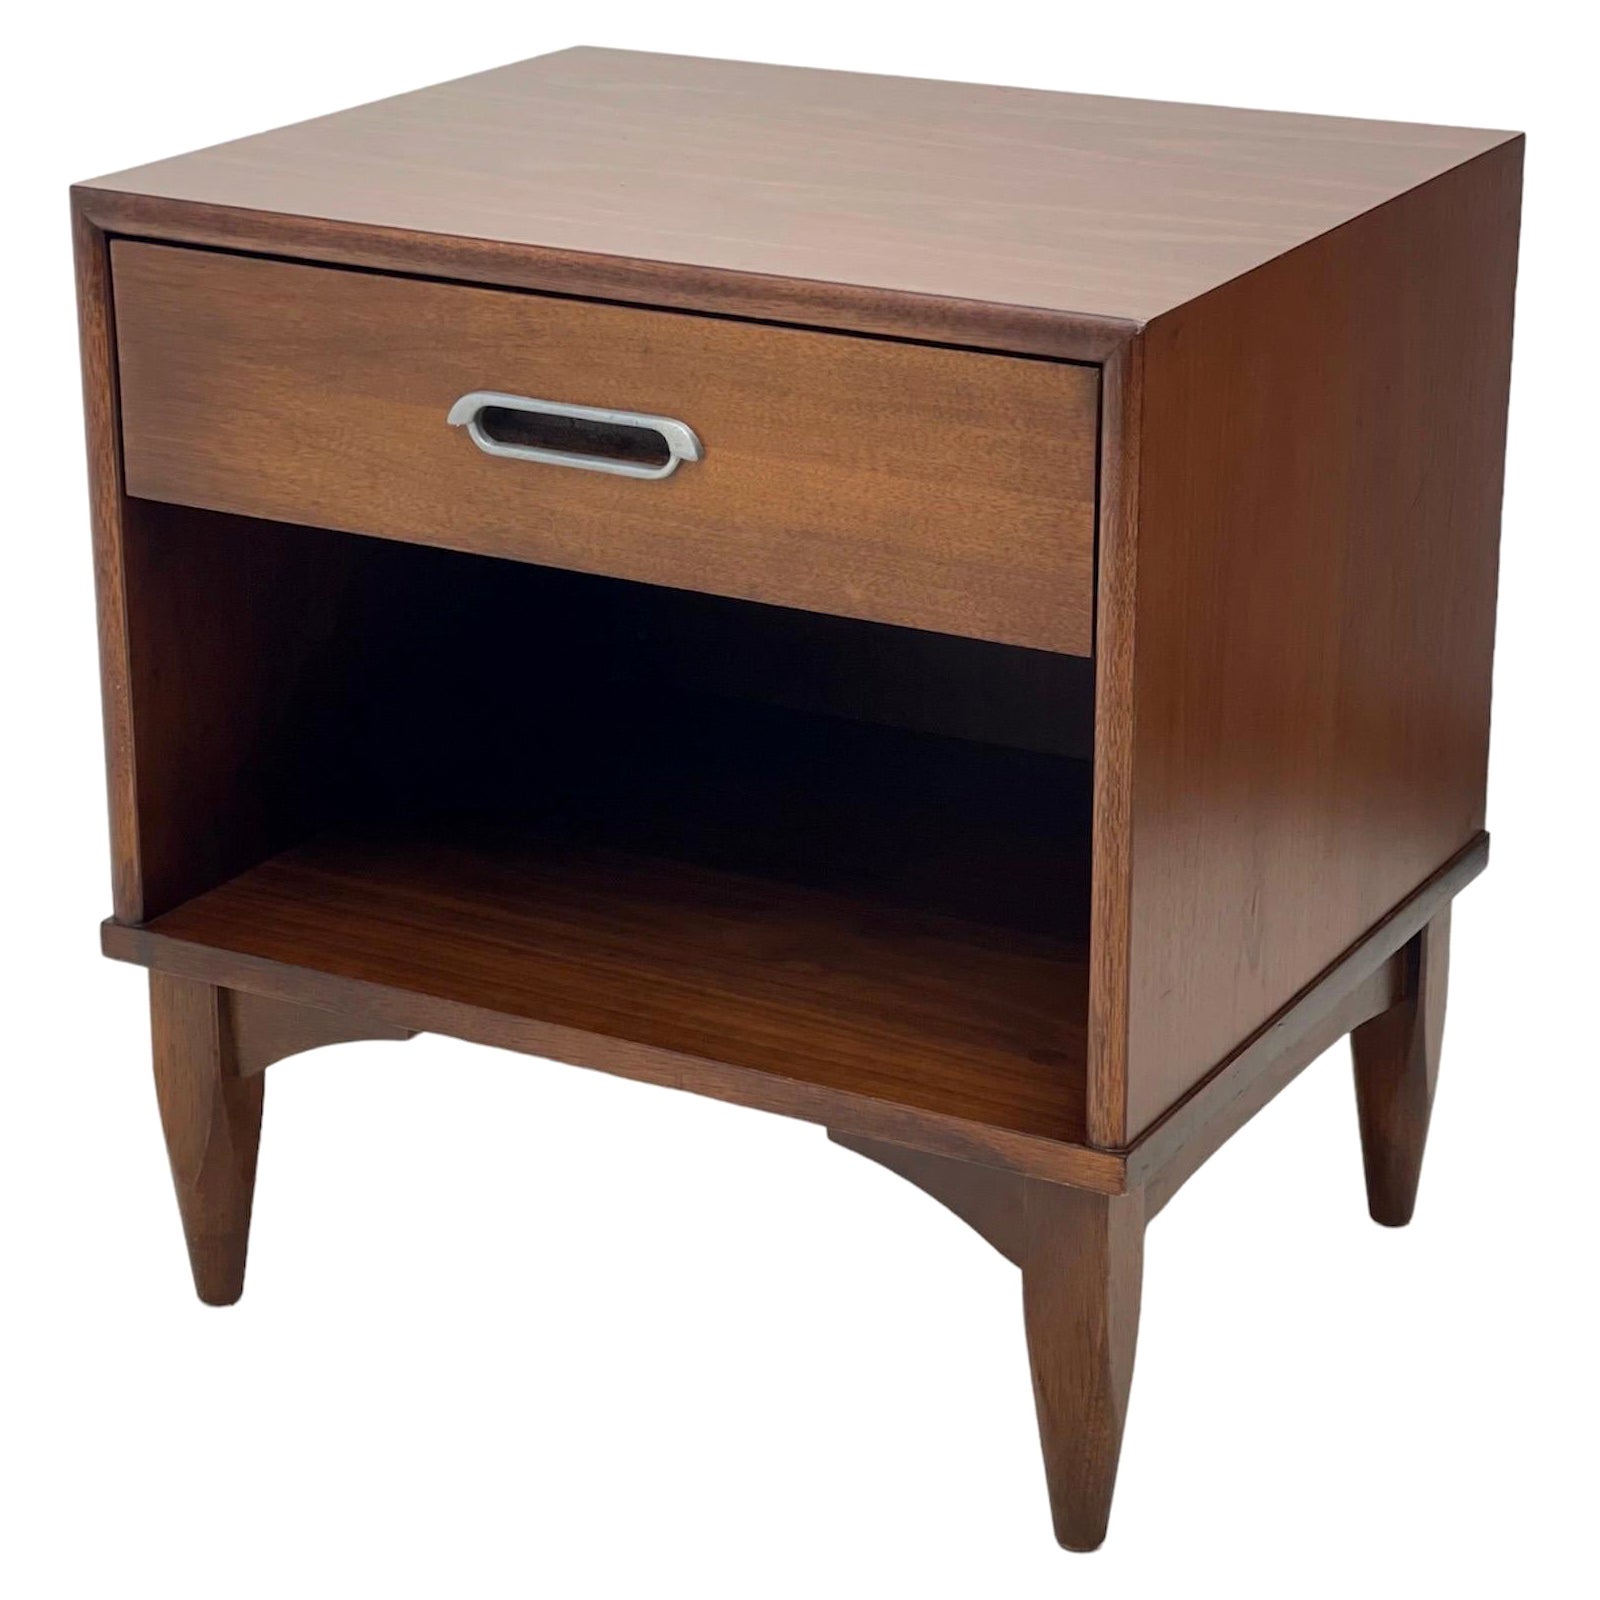 Vintage Drexel Nightstand, Dovetail Drawers For Sale